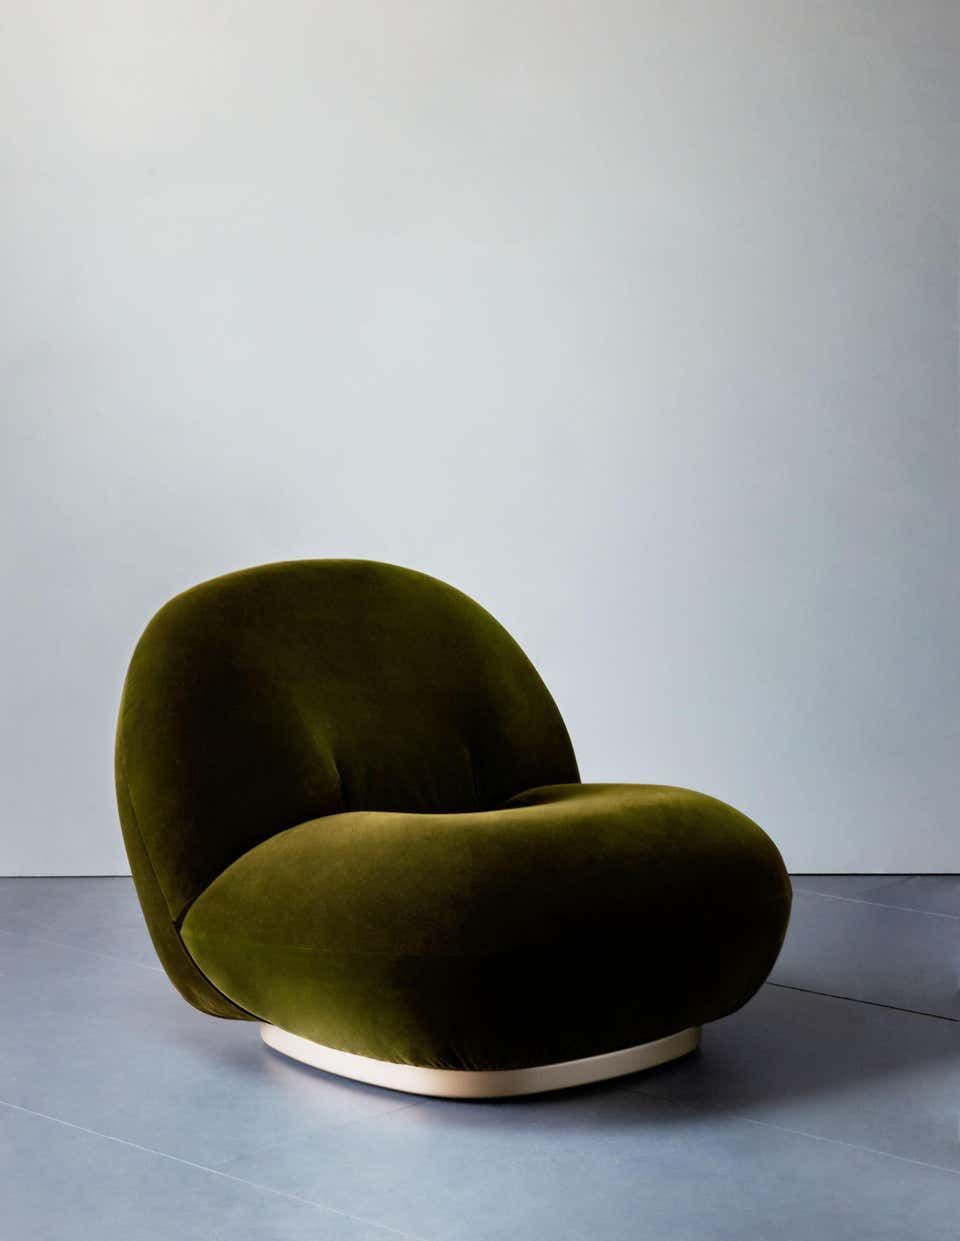 Chair design: for great comfort